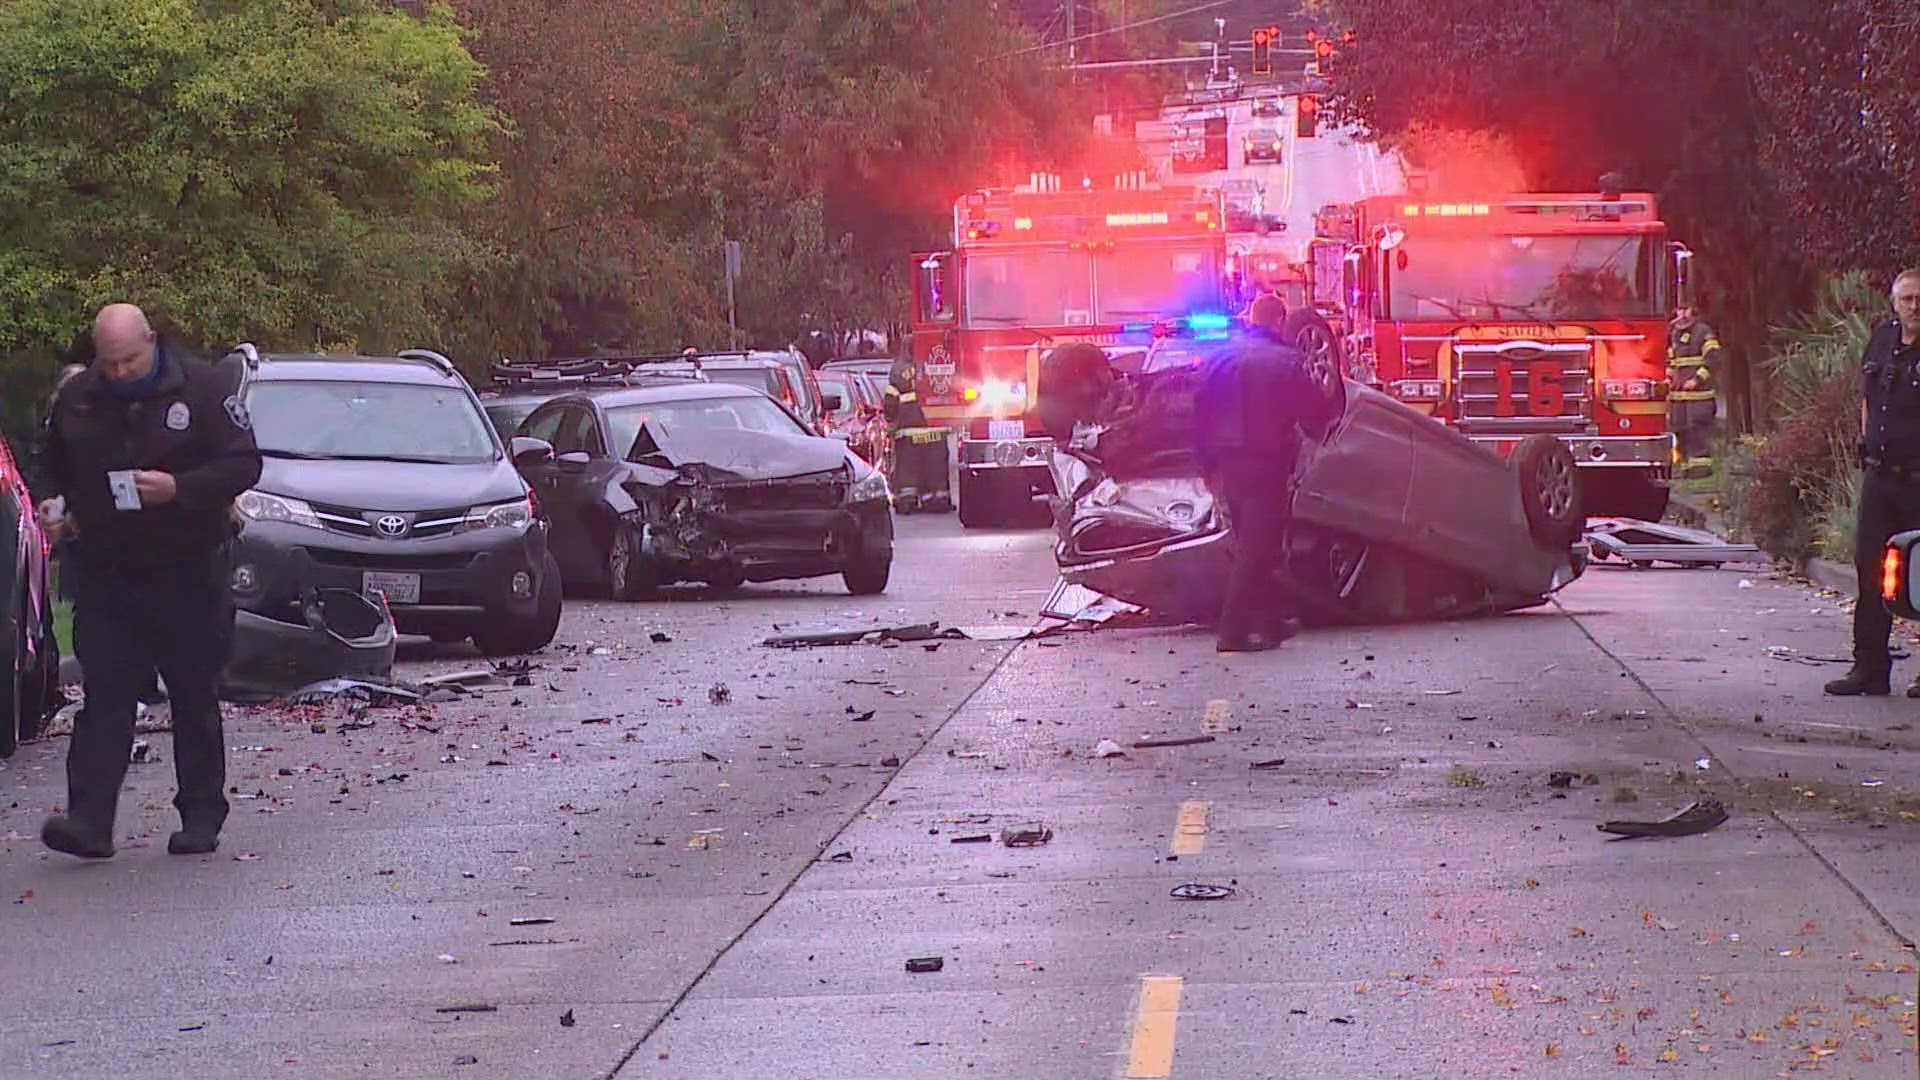 At least 7 cars were damaged in a multi-vehicle crash along 15th Ave in Seattle's Maple Leaf neighborhood